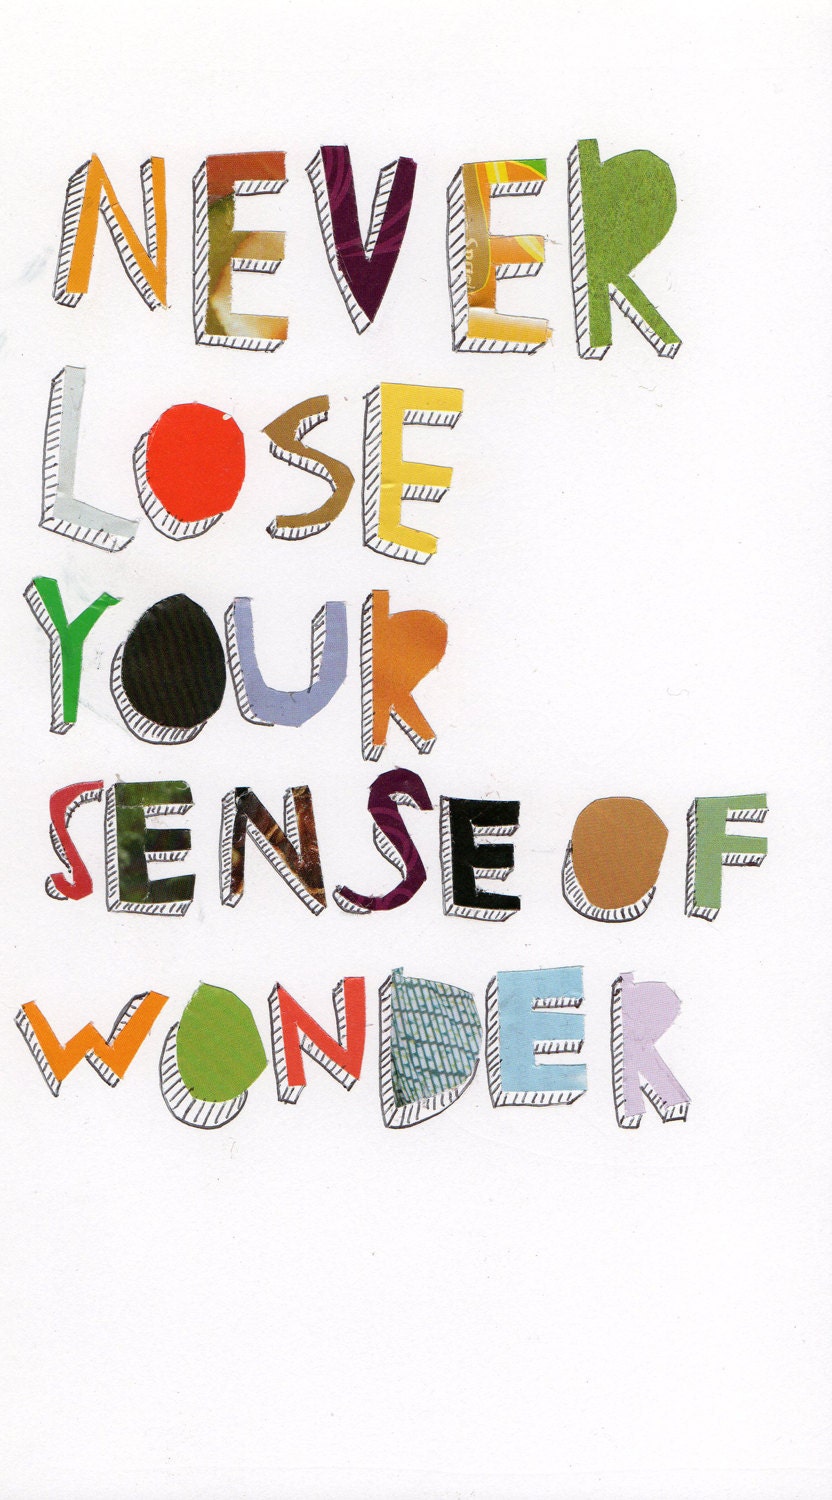 never lose your sense of wonder. handmade - cut out and ink 6" x 10"